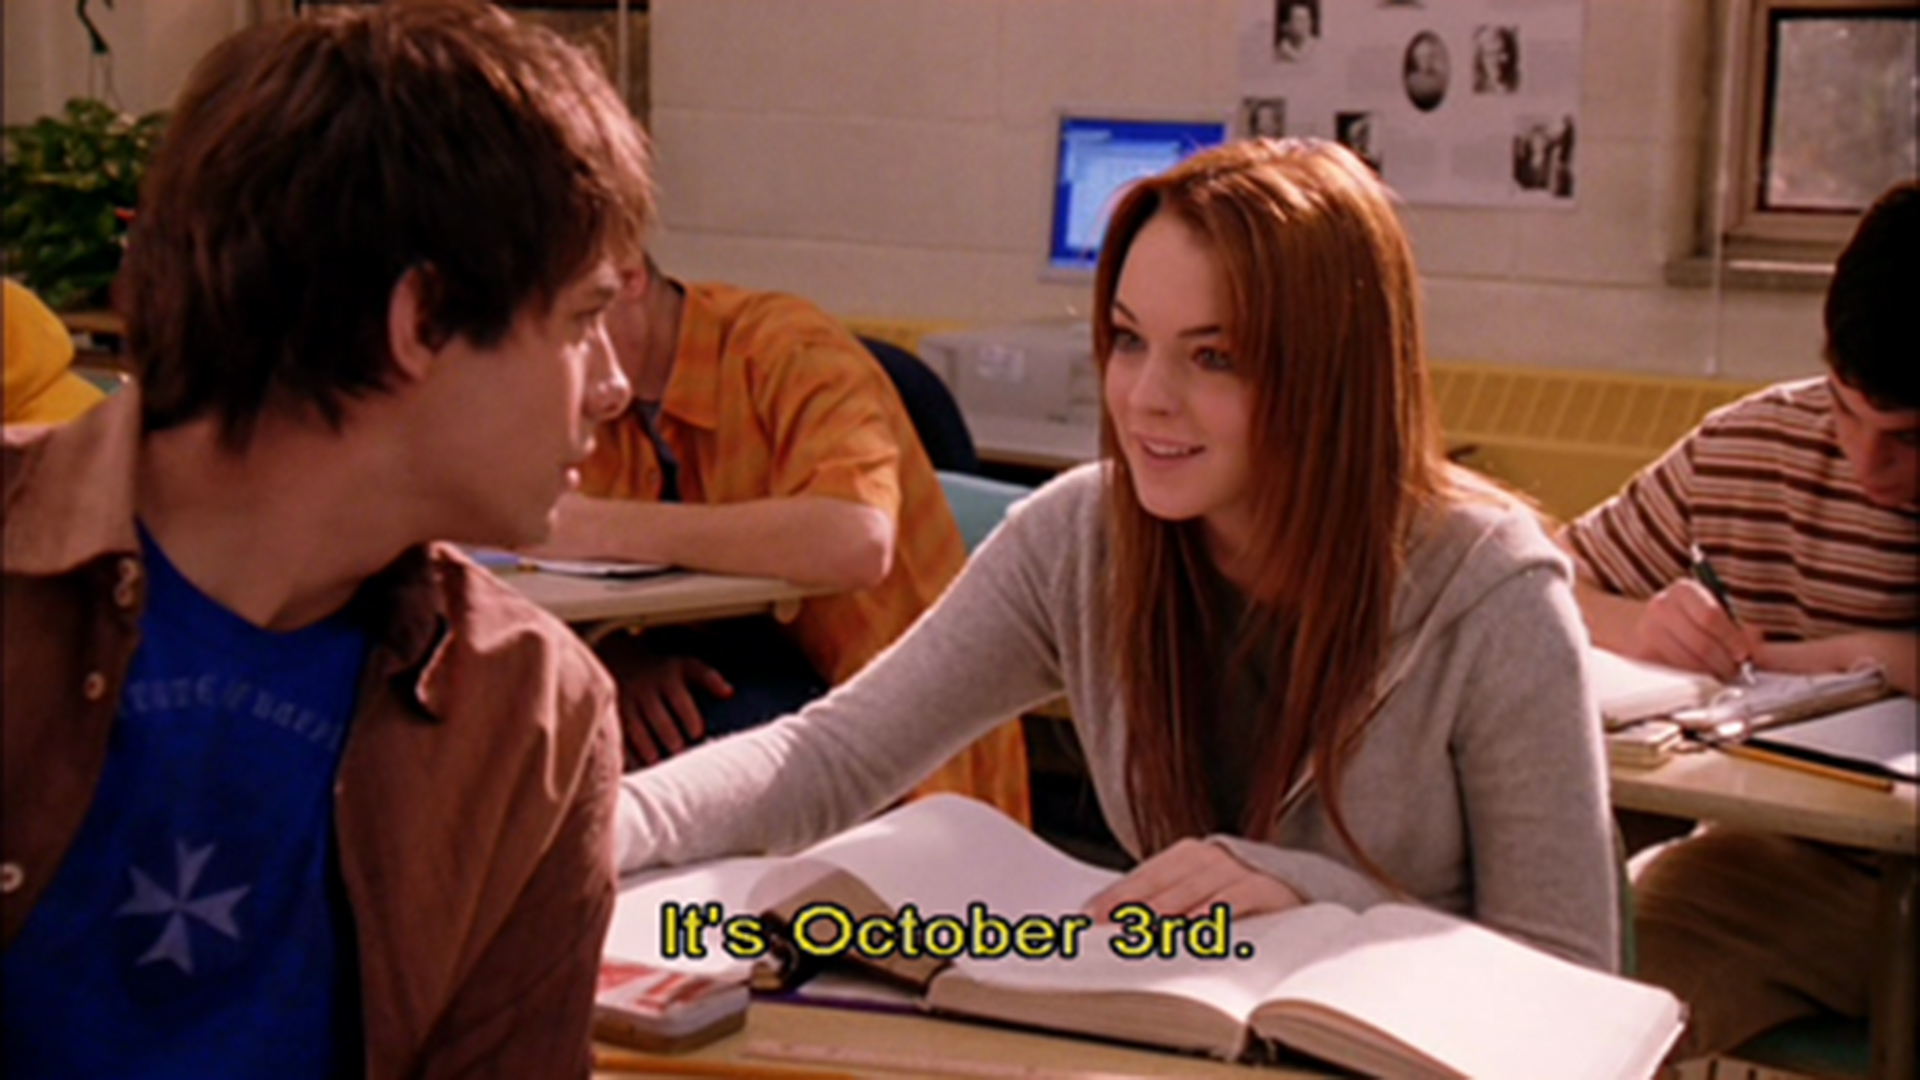 5 Songs to Blast on Mean Girls Day - JME Jacksonville Music Experience